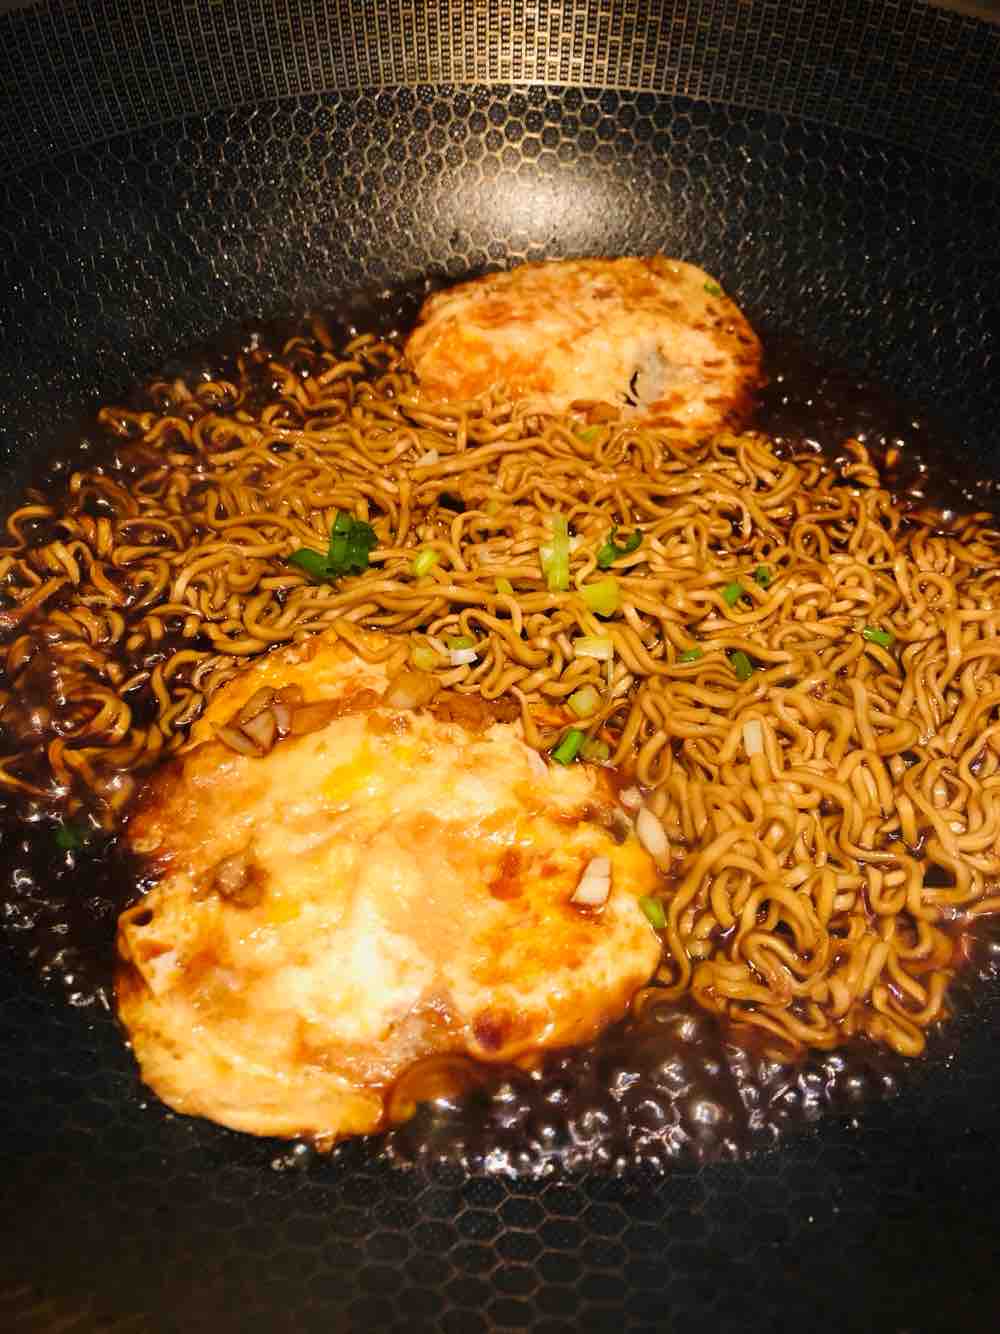 Braised Noodles with Poached Egg recipe